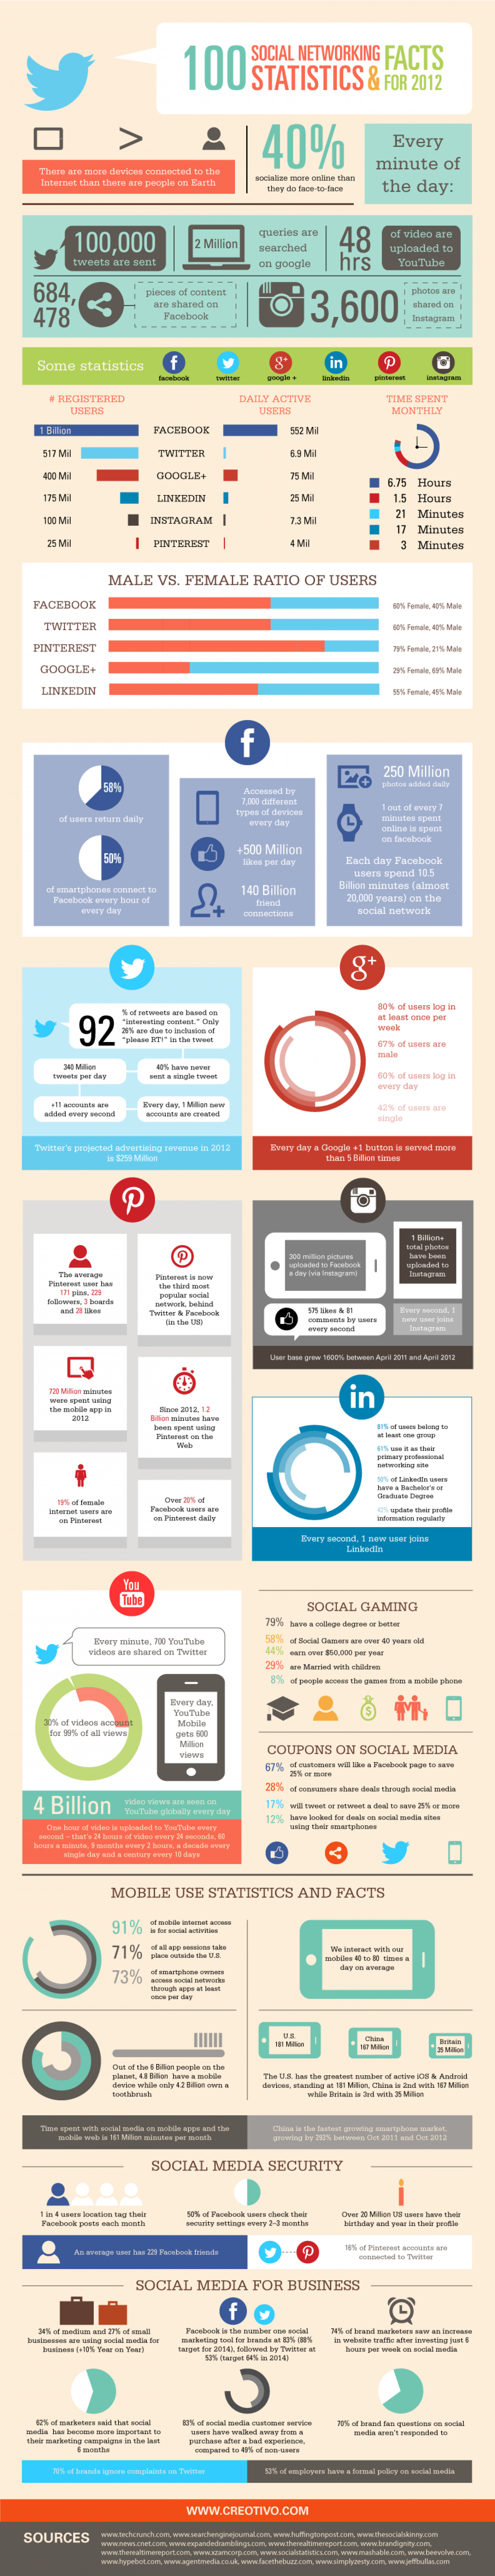 100 Social Networking Statistics & Facts for 2012 Infographic